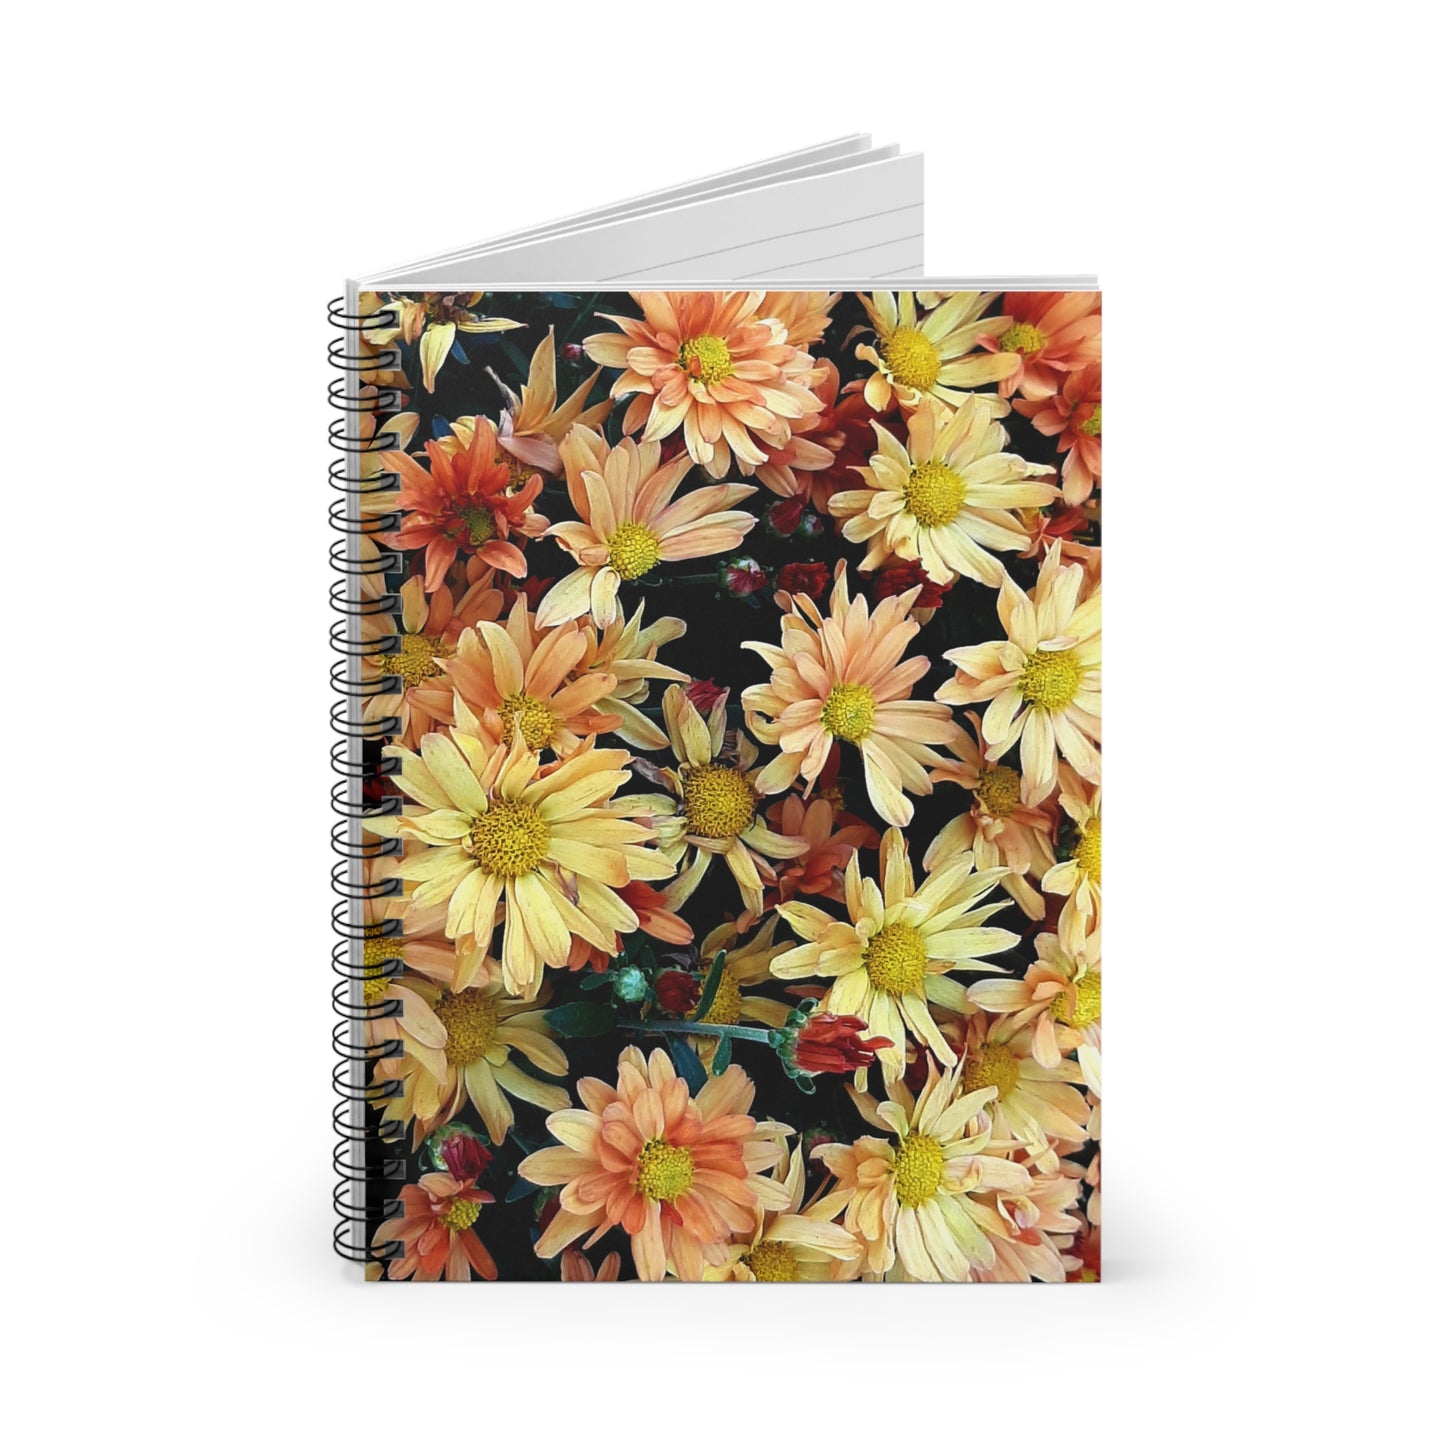 Fall Asters Notebook - Ruled Line